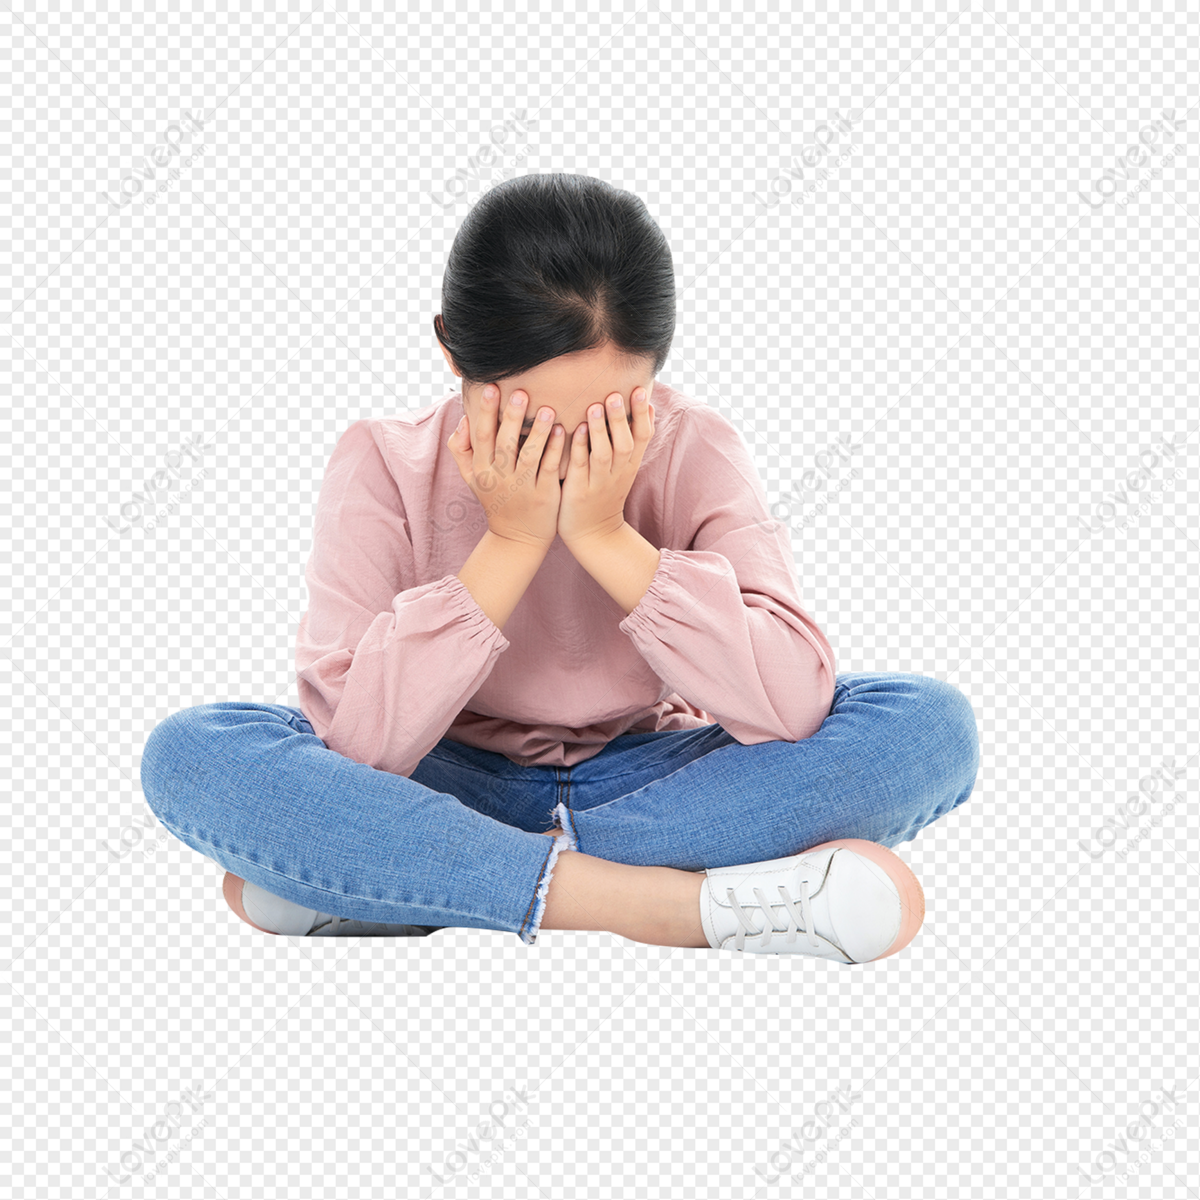 Sad Girl Sitting On The Ground PNG Transparent Background And Clipart Image  For Free Download - Lovepik | 401660190